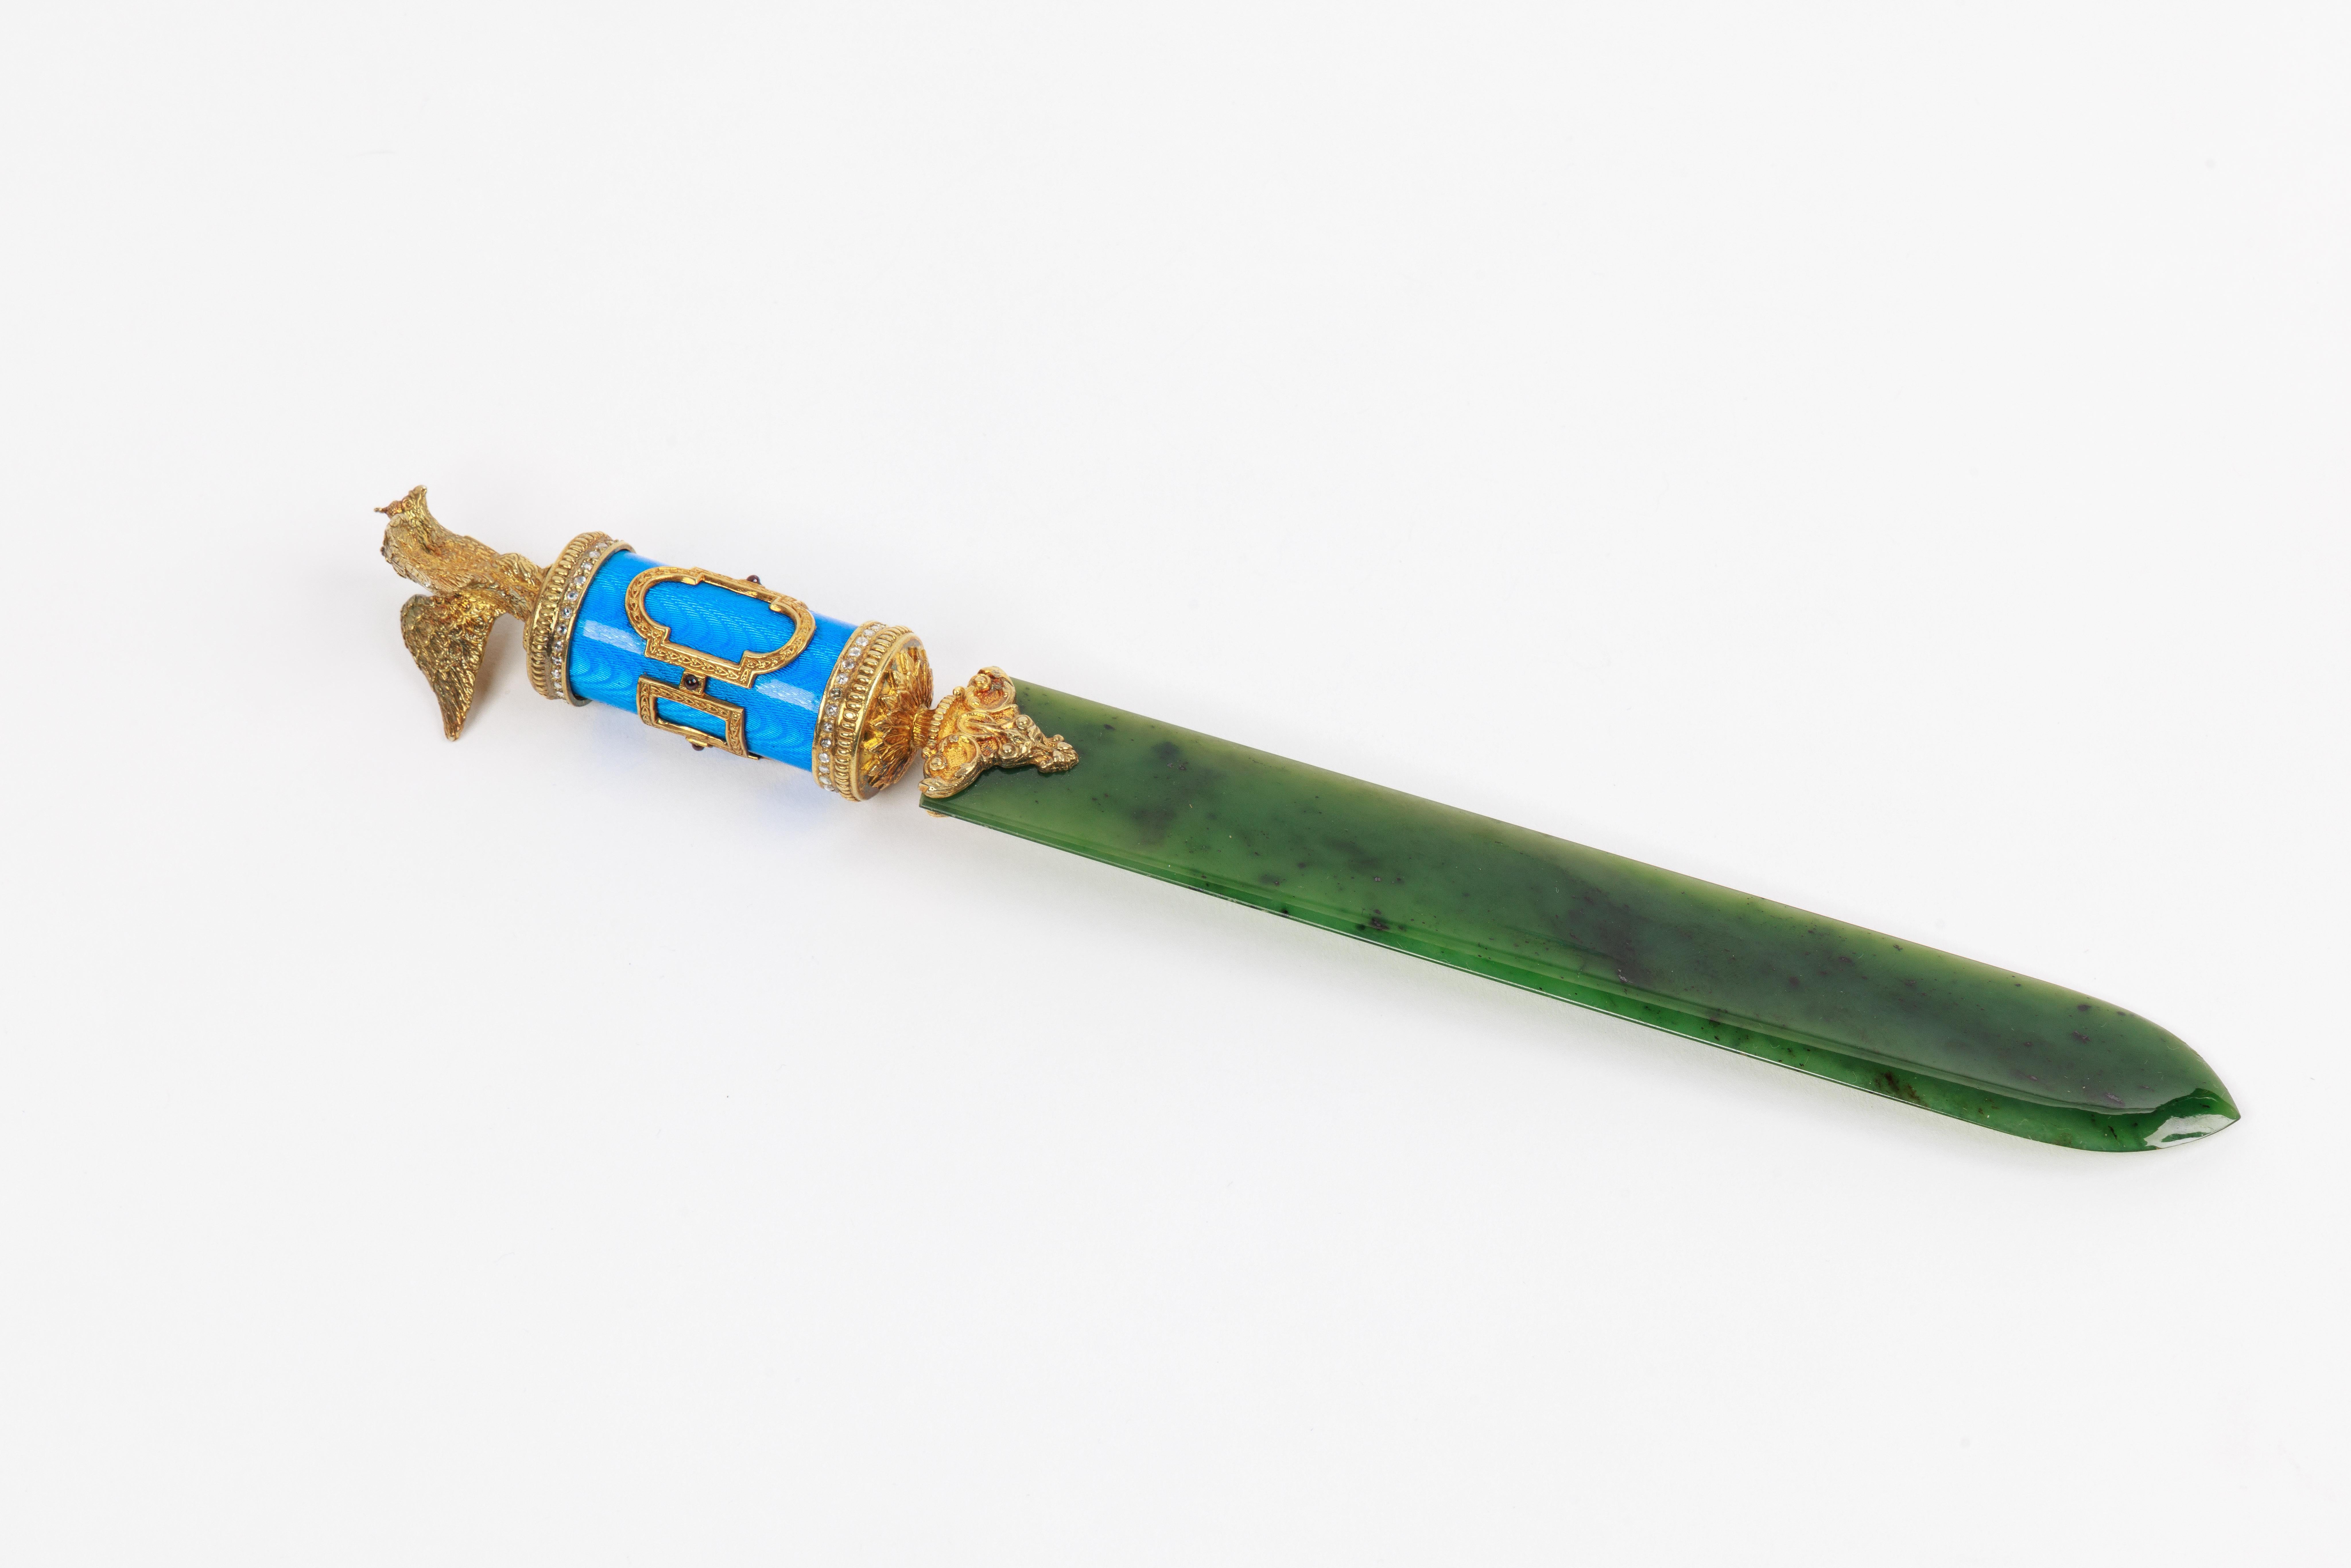 A Russian silver-gilt, diamonds, nephrite, and blue Guilloche enamel letter opener, with a Russian double eagle, in original fitted box.

Exquisite jewel like quality, in the Faberge style.

Measures 10